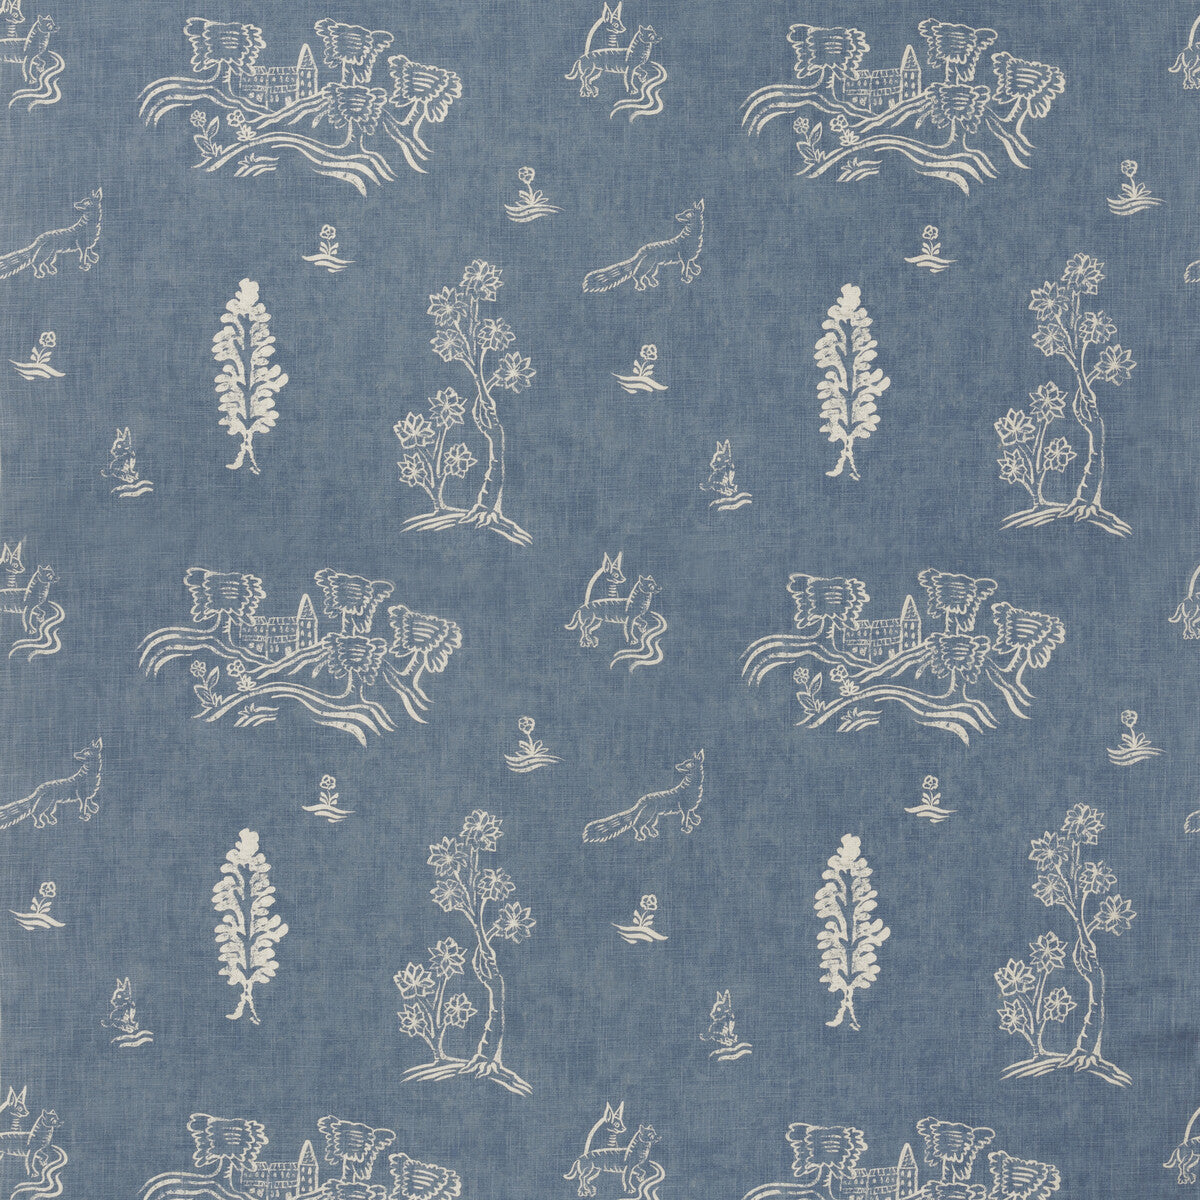 Friendly Folk fabric in happy blue color - pattern AM100318.5.0 - by Kravet Couture in the Andrew Martin Kit Kemp collection